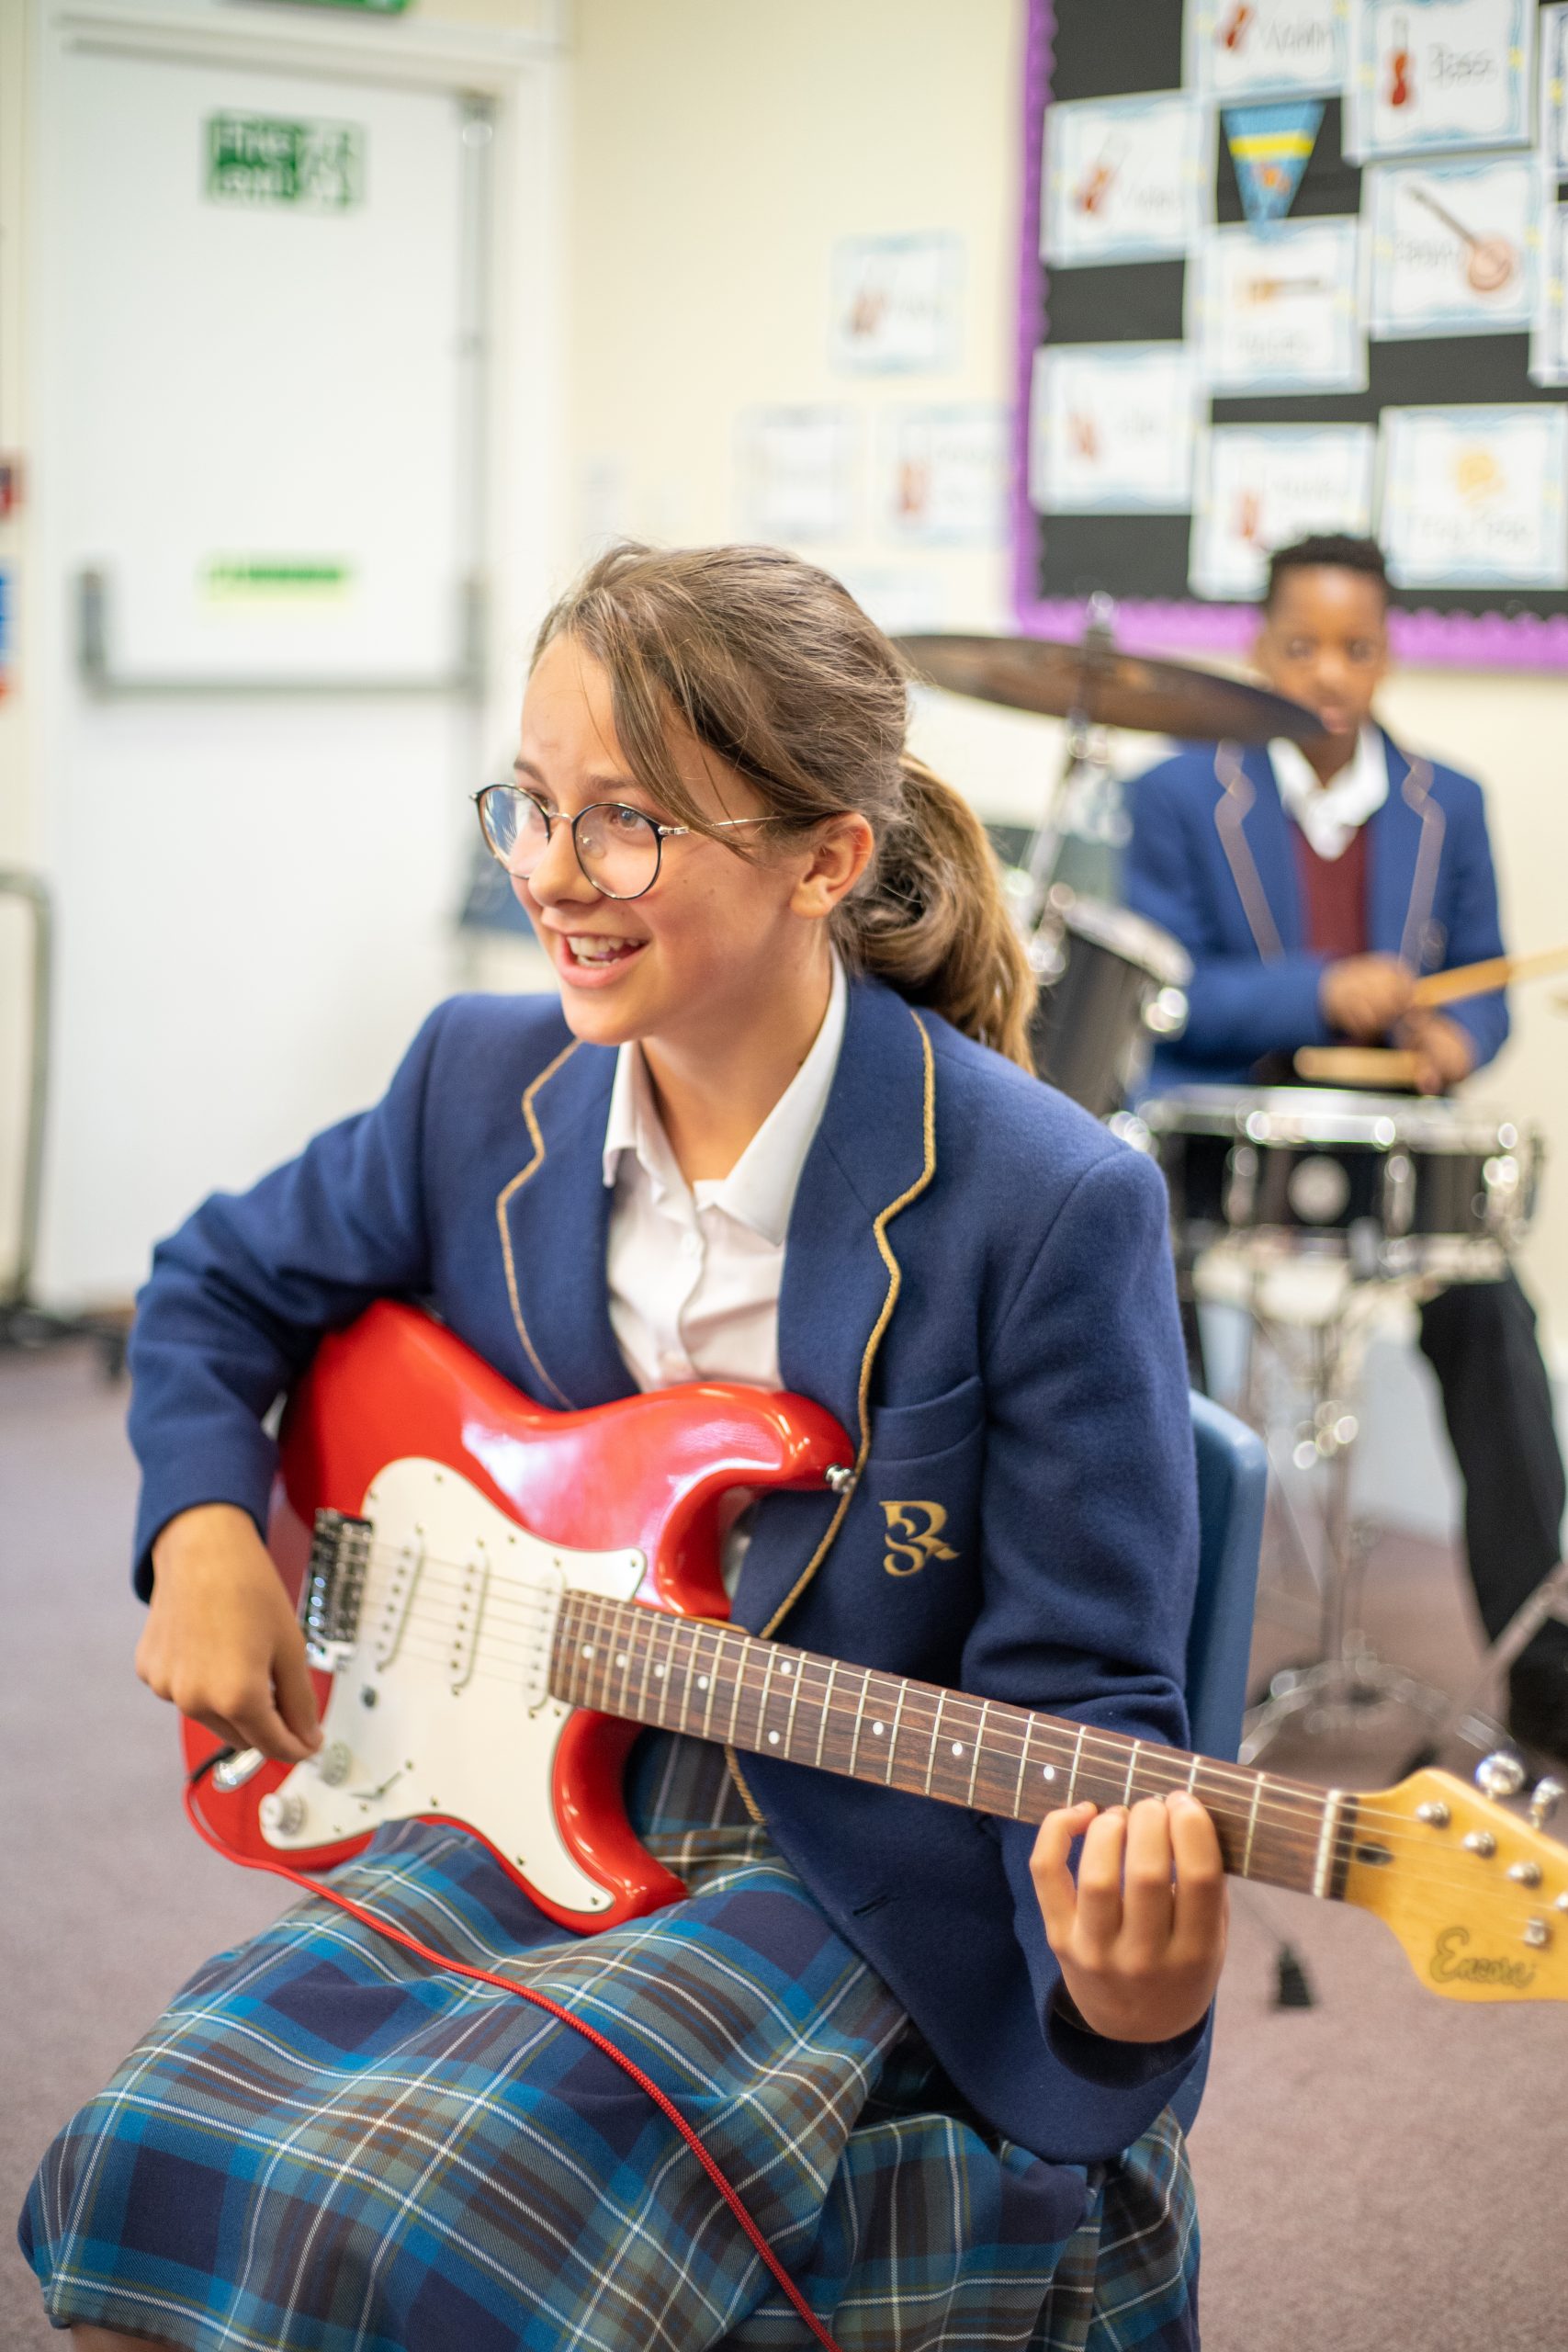 Rookwood prep school students playing instruments in music class.